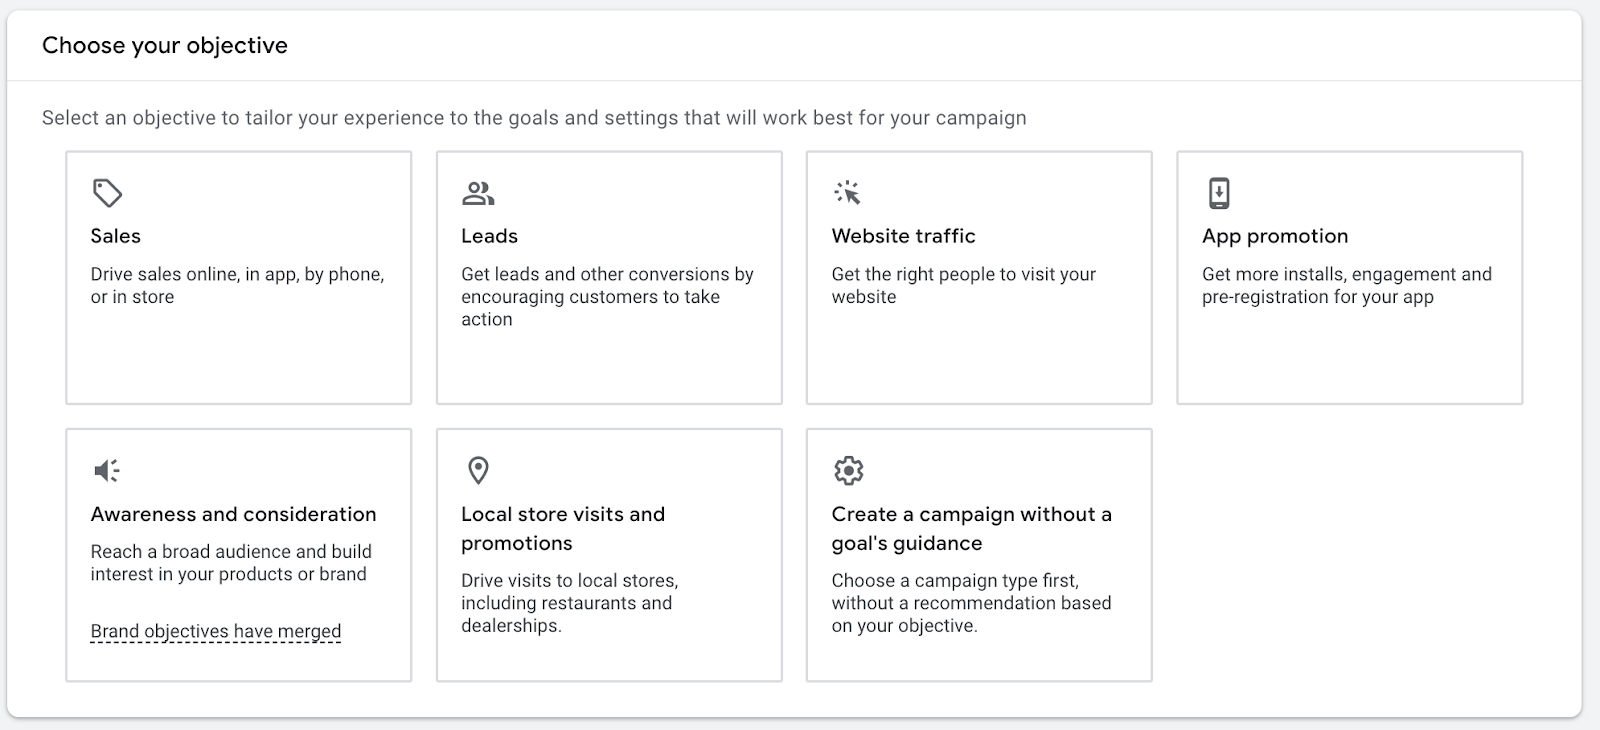 Google Ads campaign setup with objectives to choose from including leads, sales and awareness.